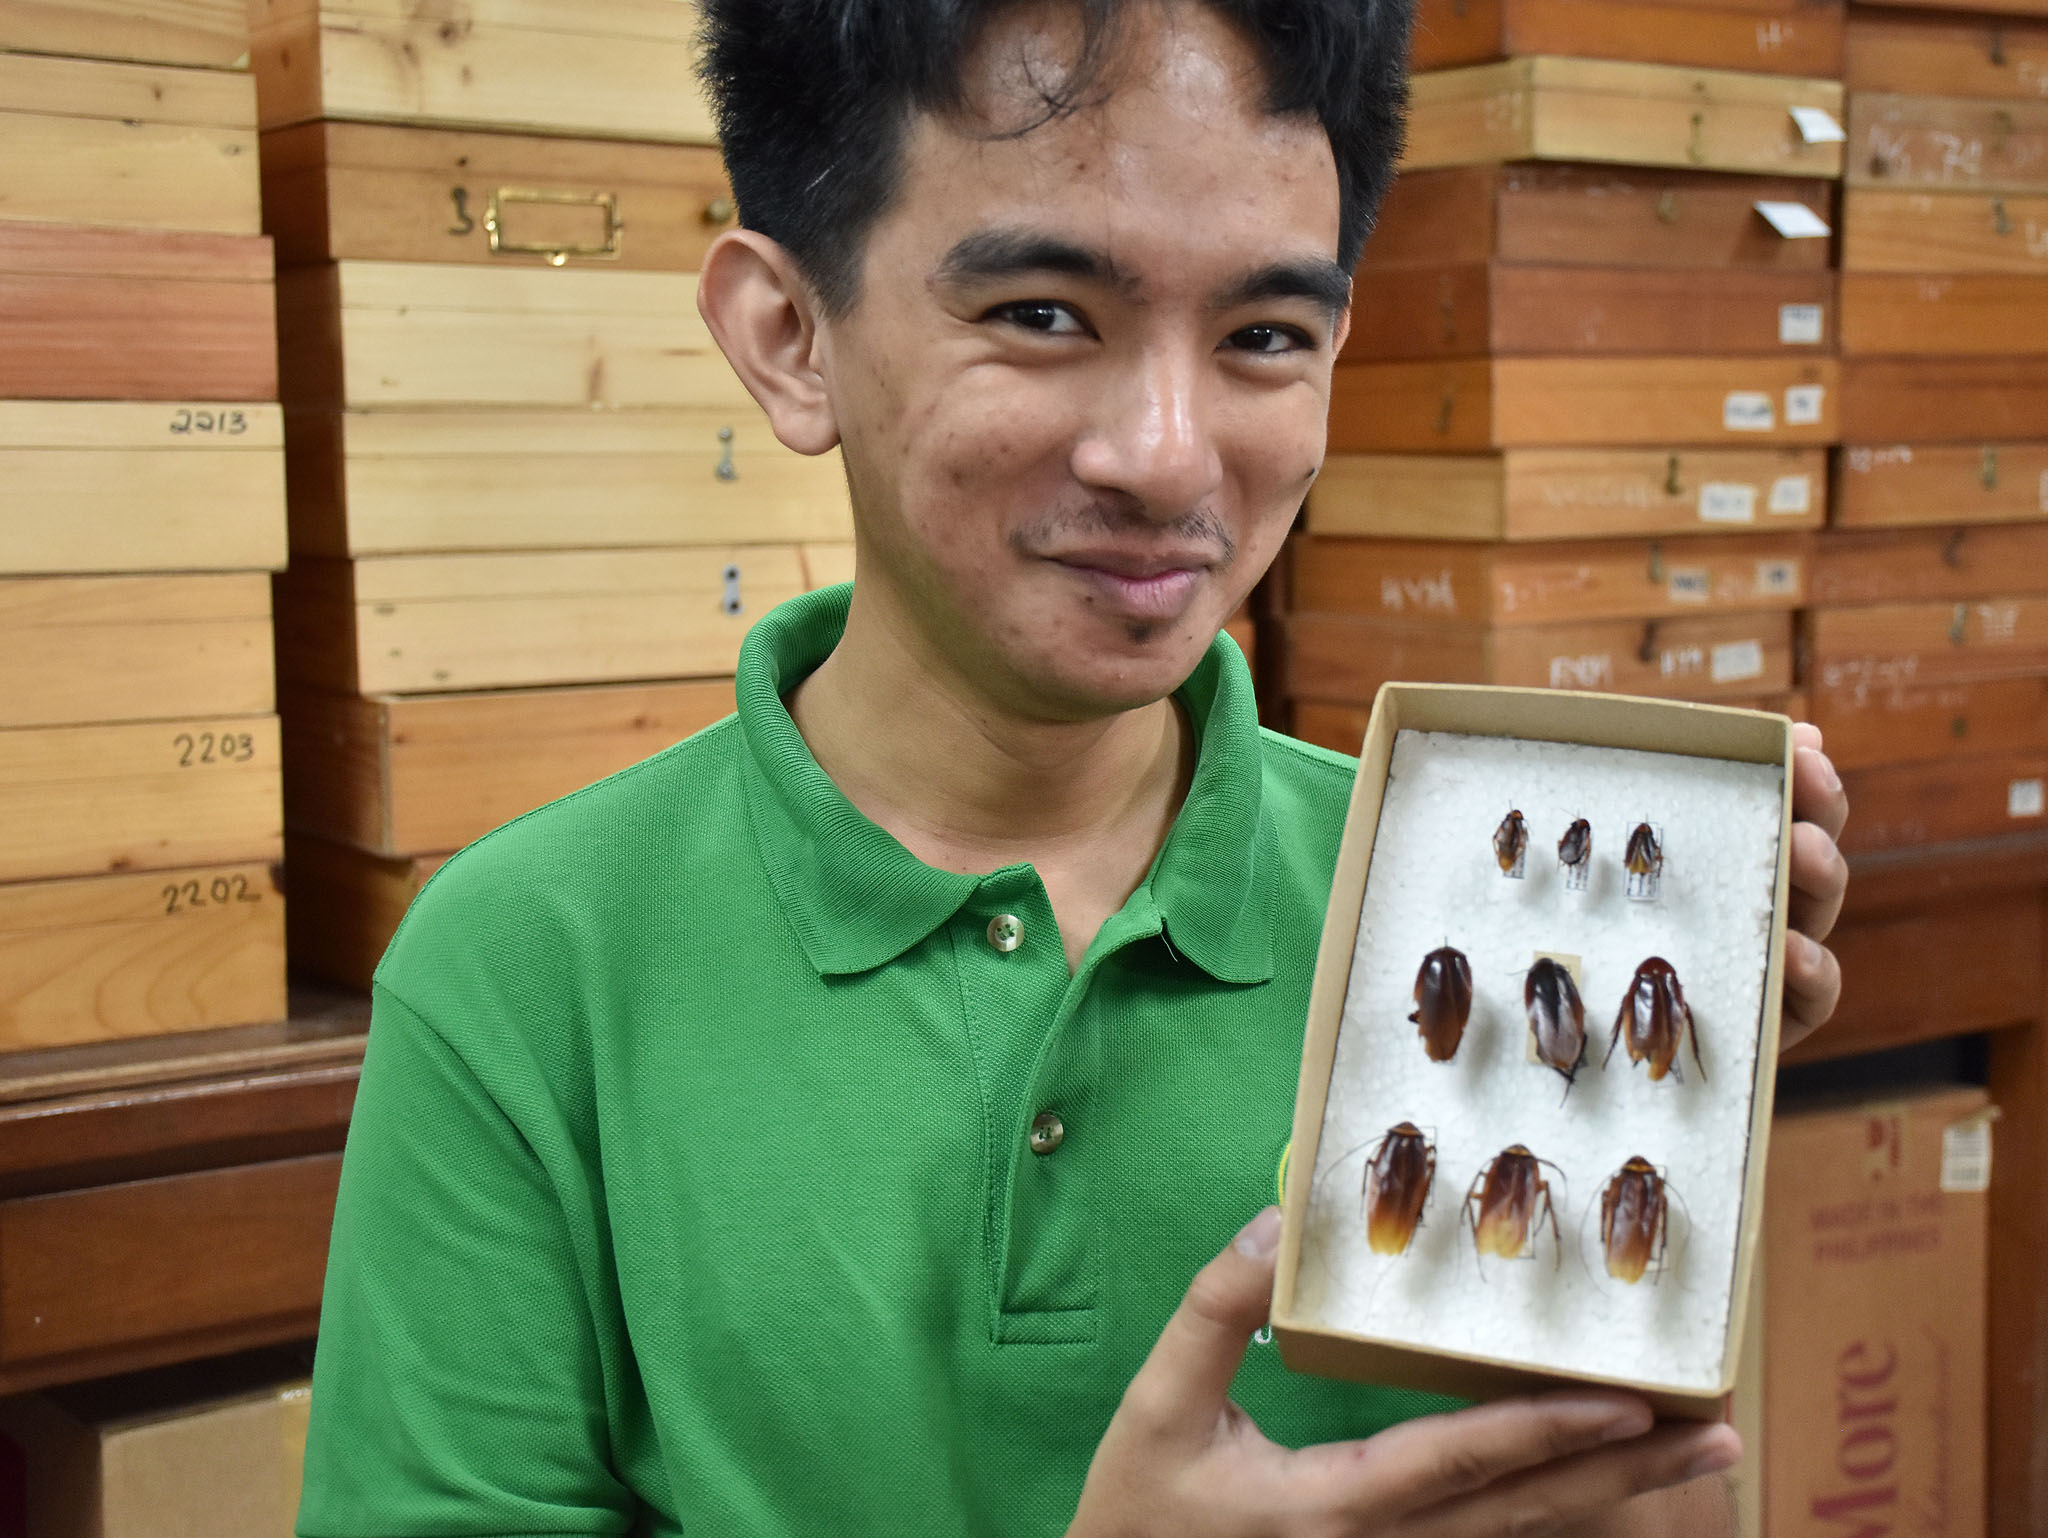 Cristian Lucañas and his two new LOTR-inspired cockroach genera